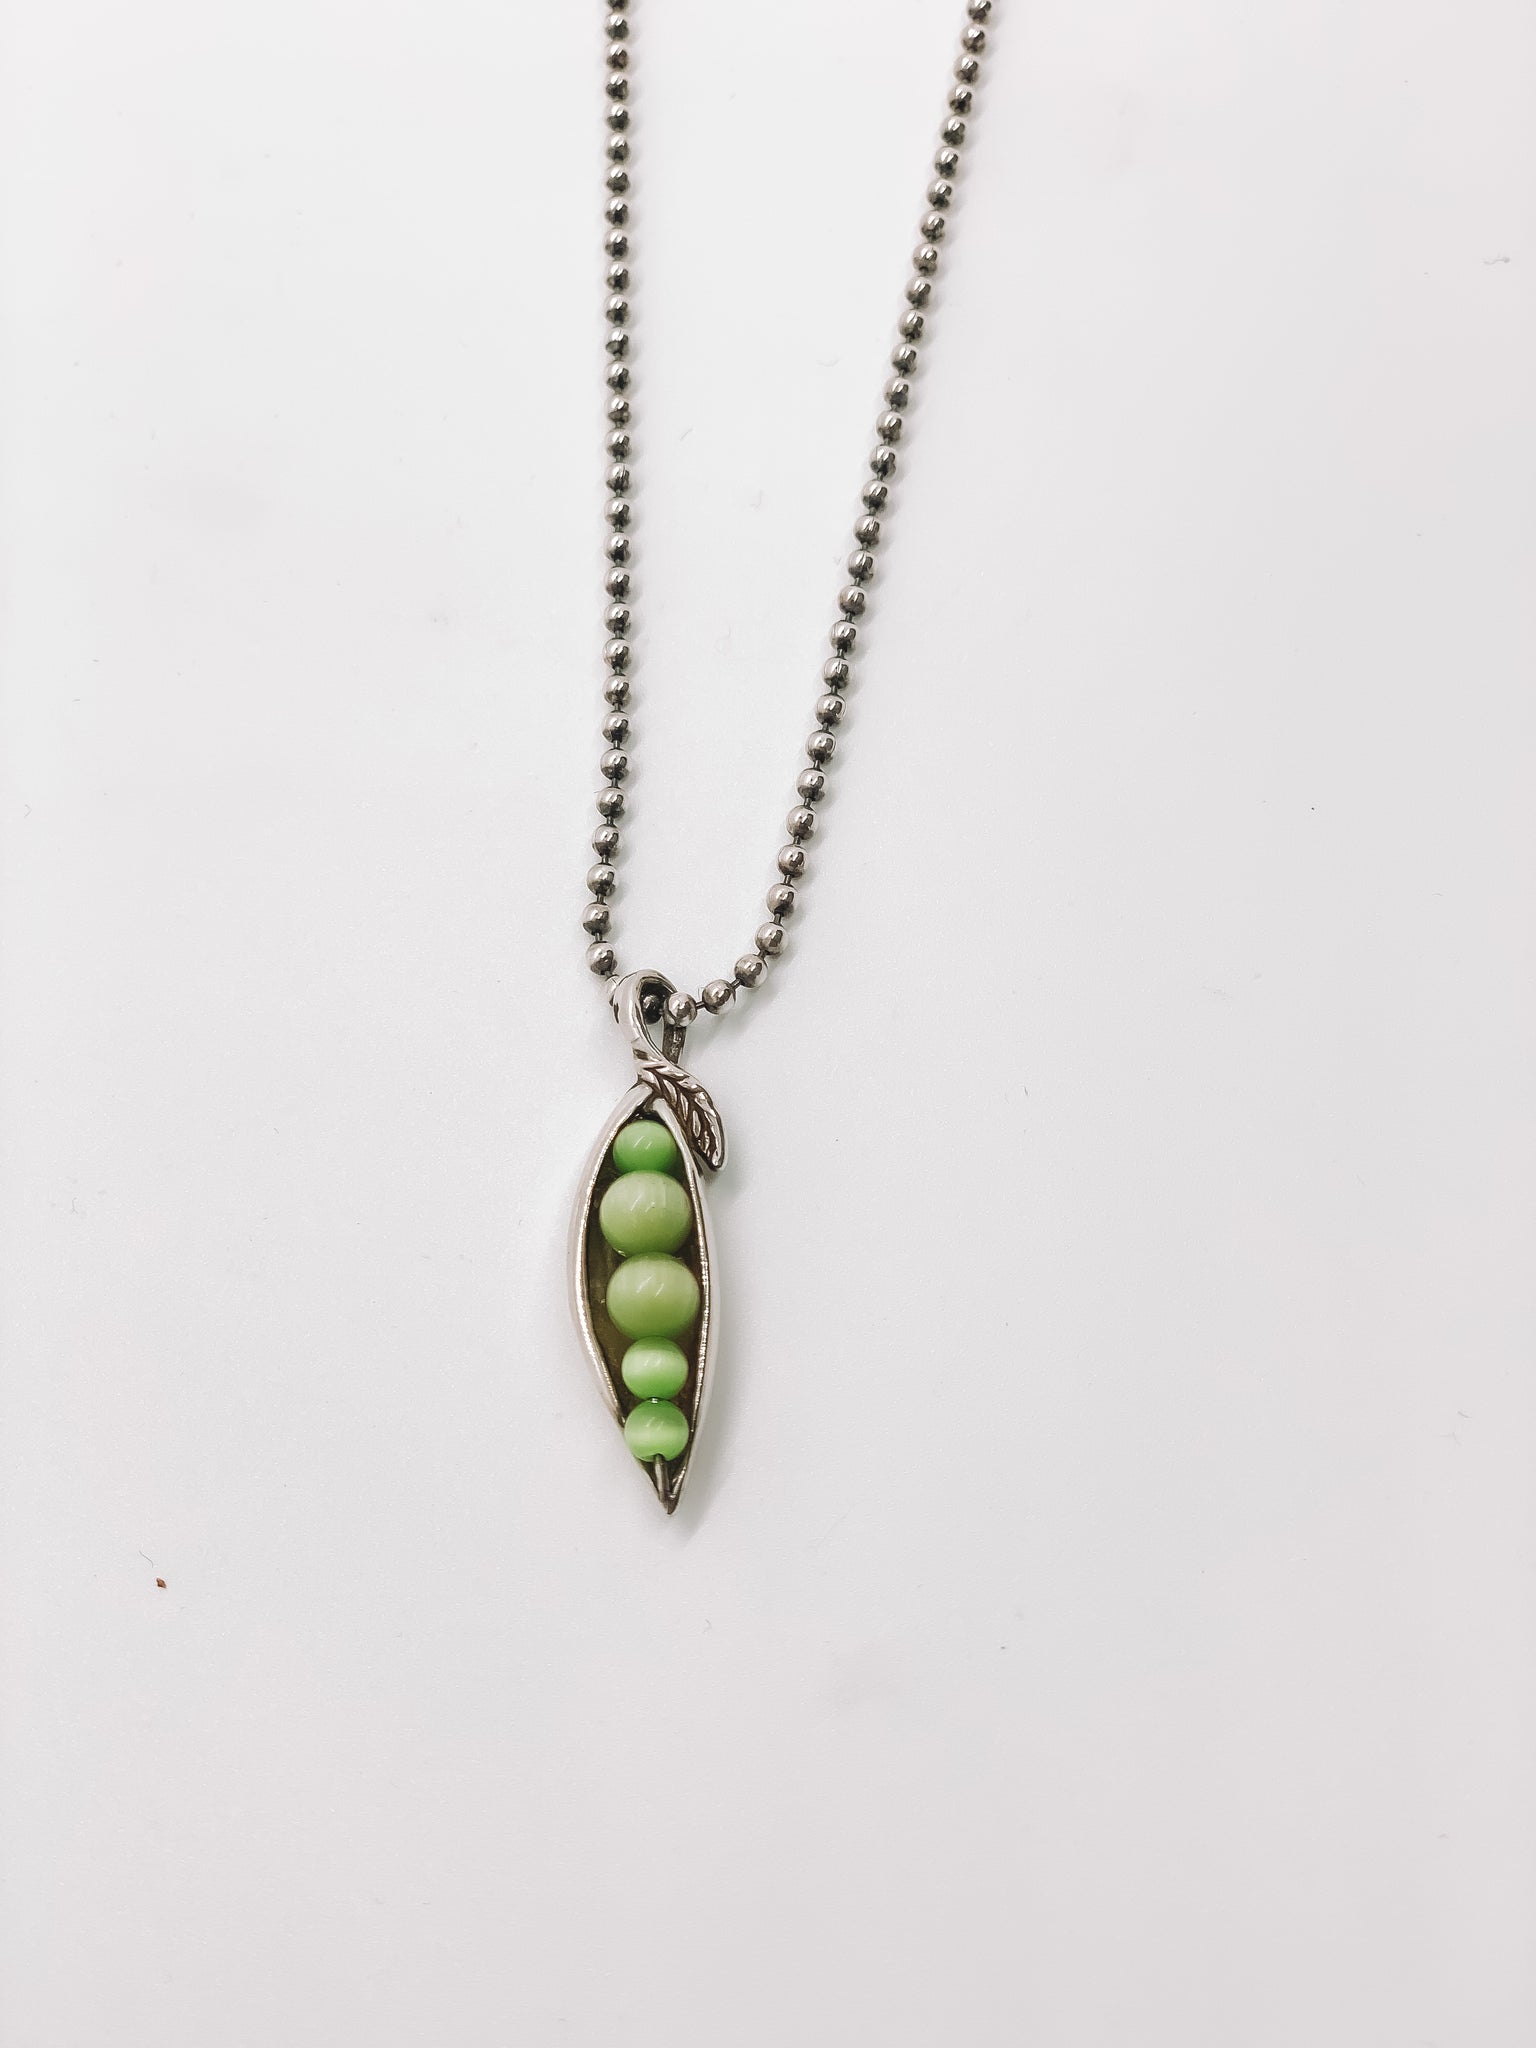 Peas in a Pod Pendant and chain